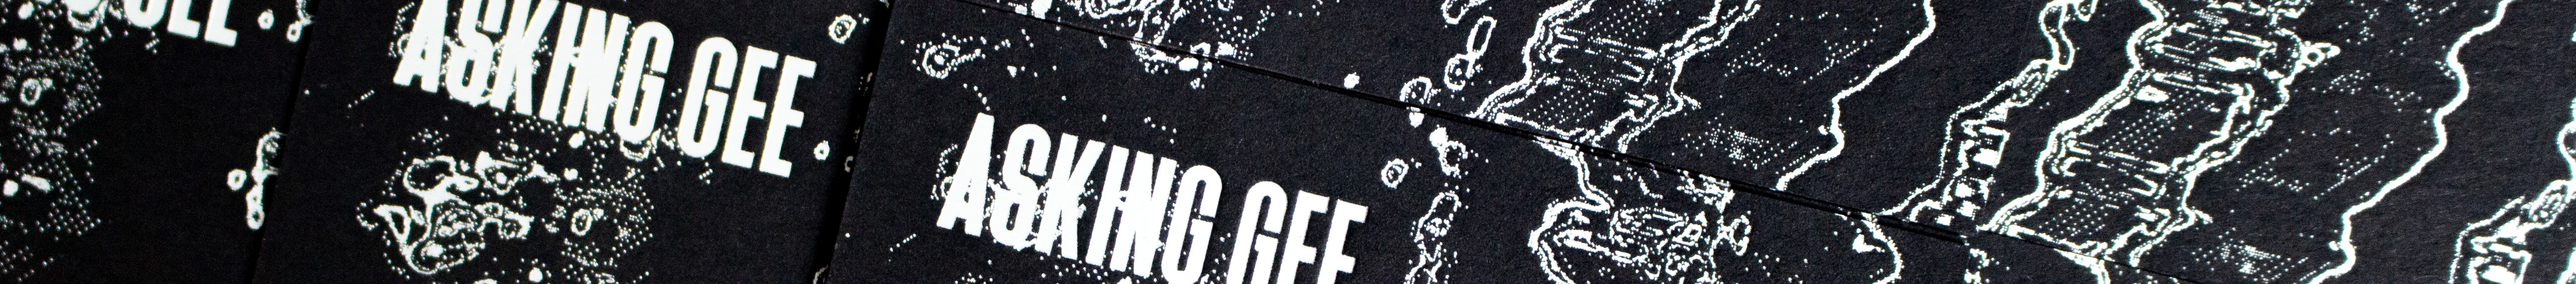 Asking Gee's profile banner